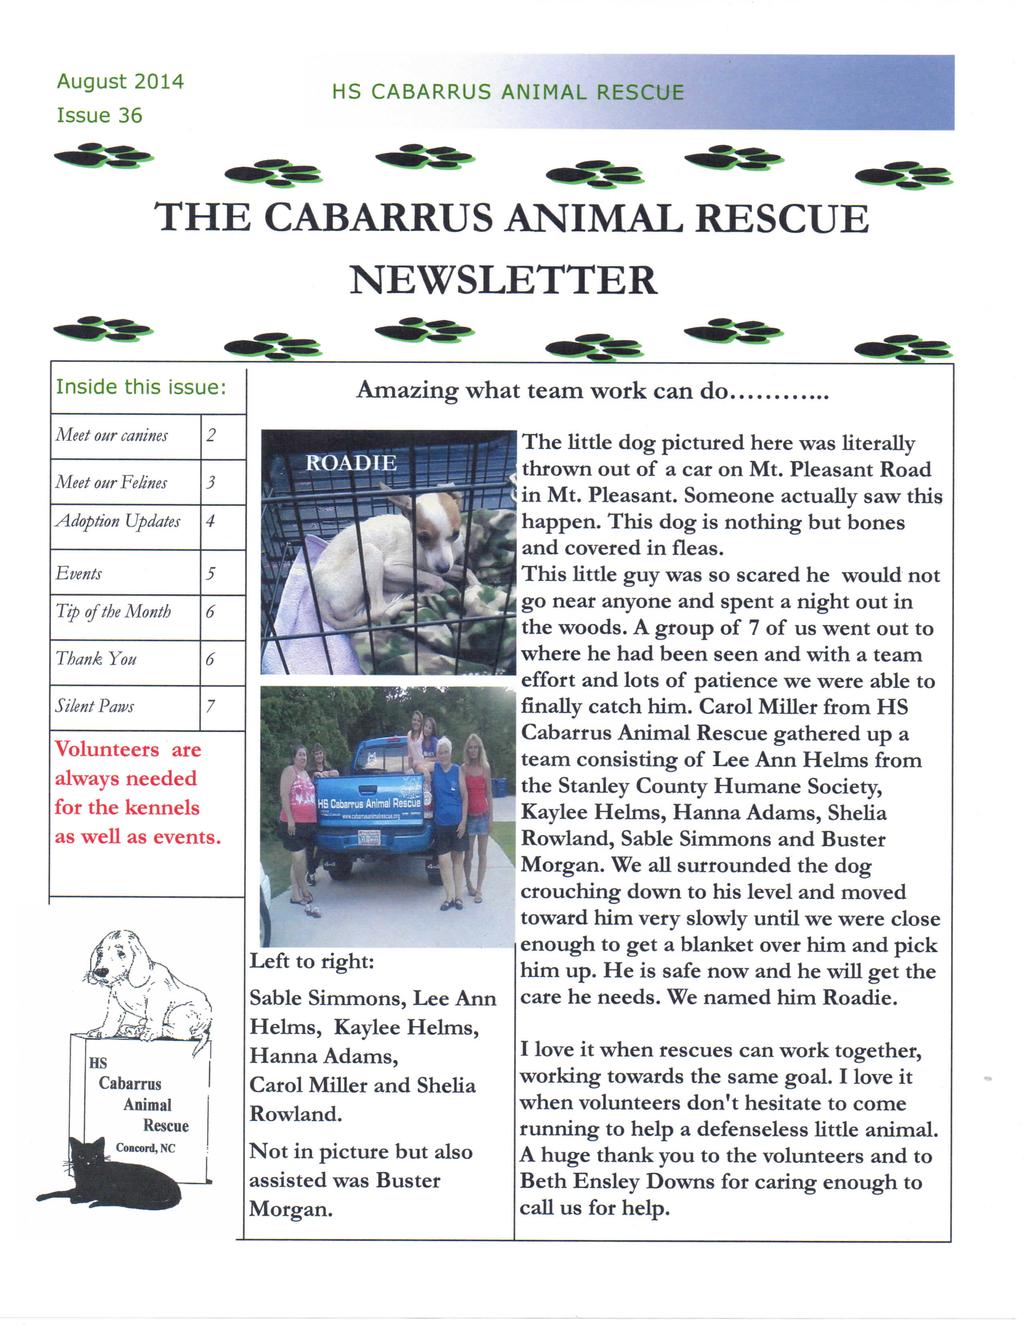 August 2014 Issue 36 HS CABARRUS ANIMAL RESCUE THE CABARRUS ANIMAL RESCUE NEWSLETTER Inside this issue: Amazing what team work can do.